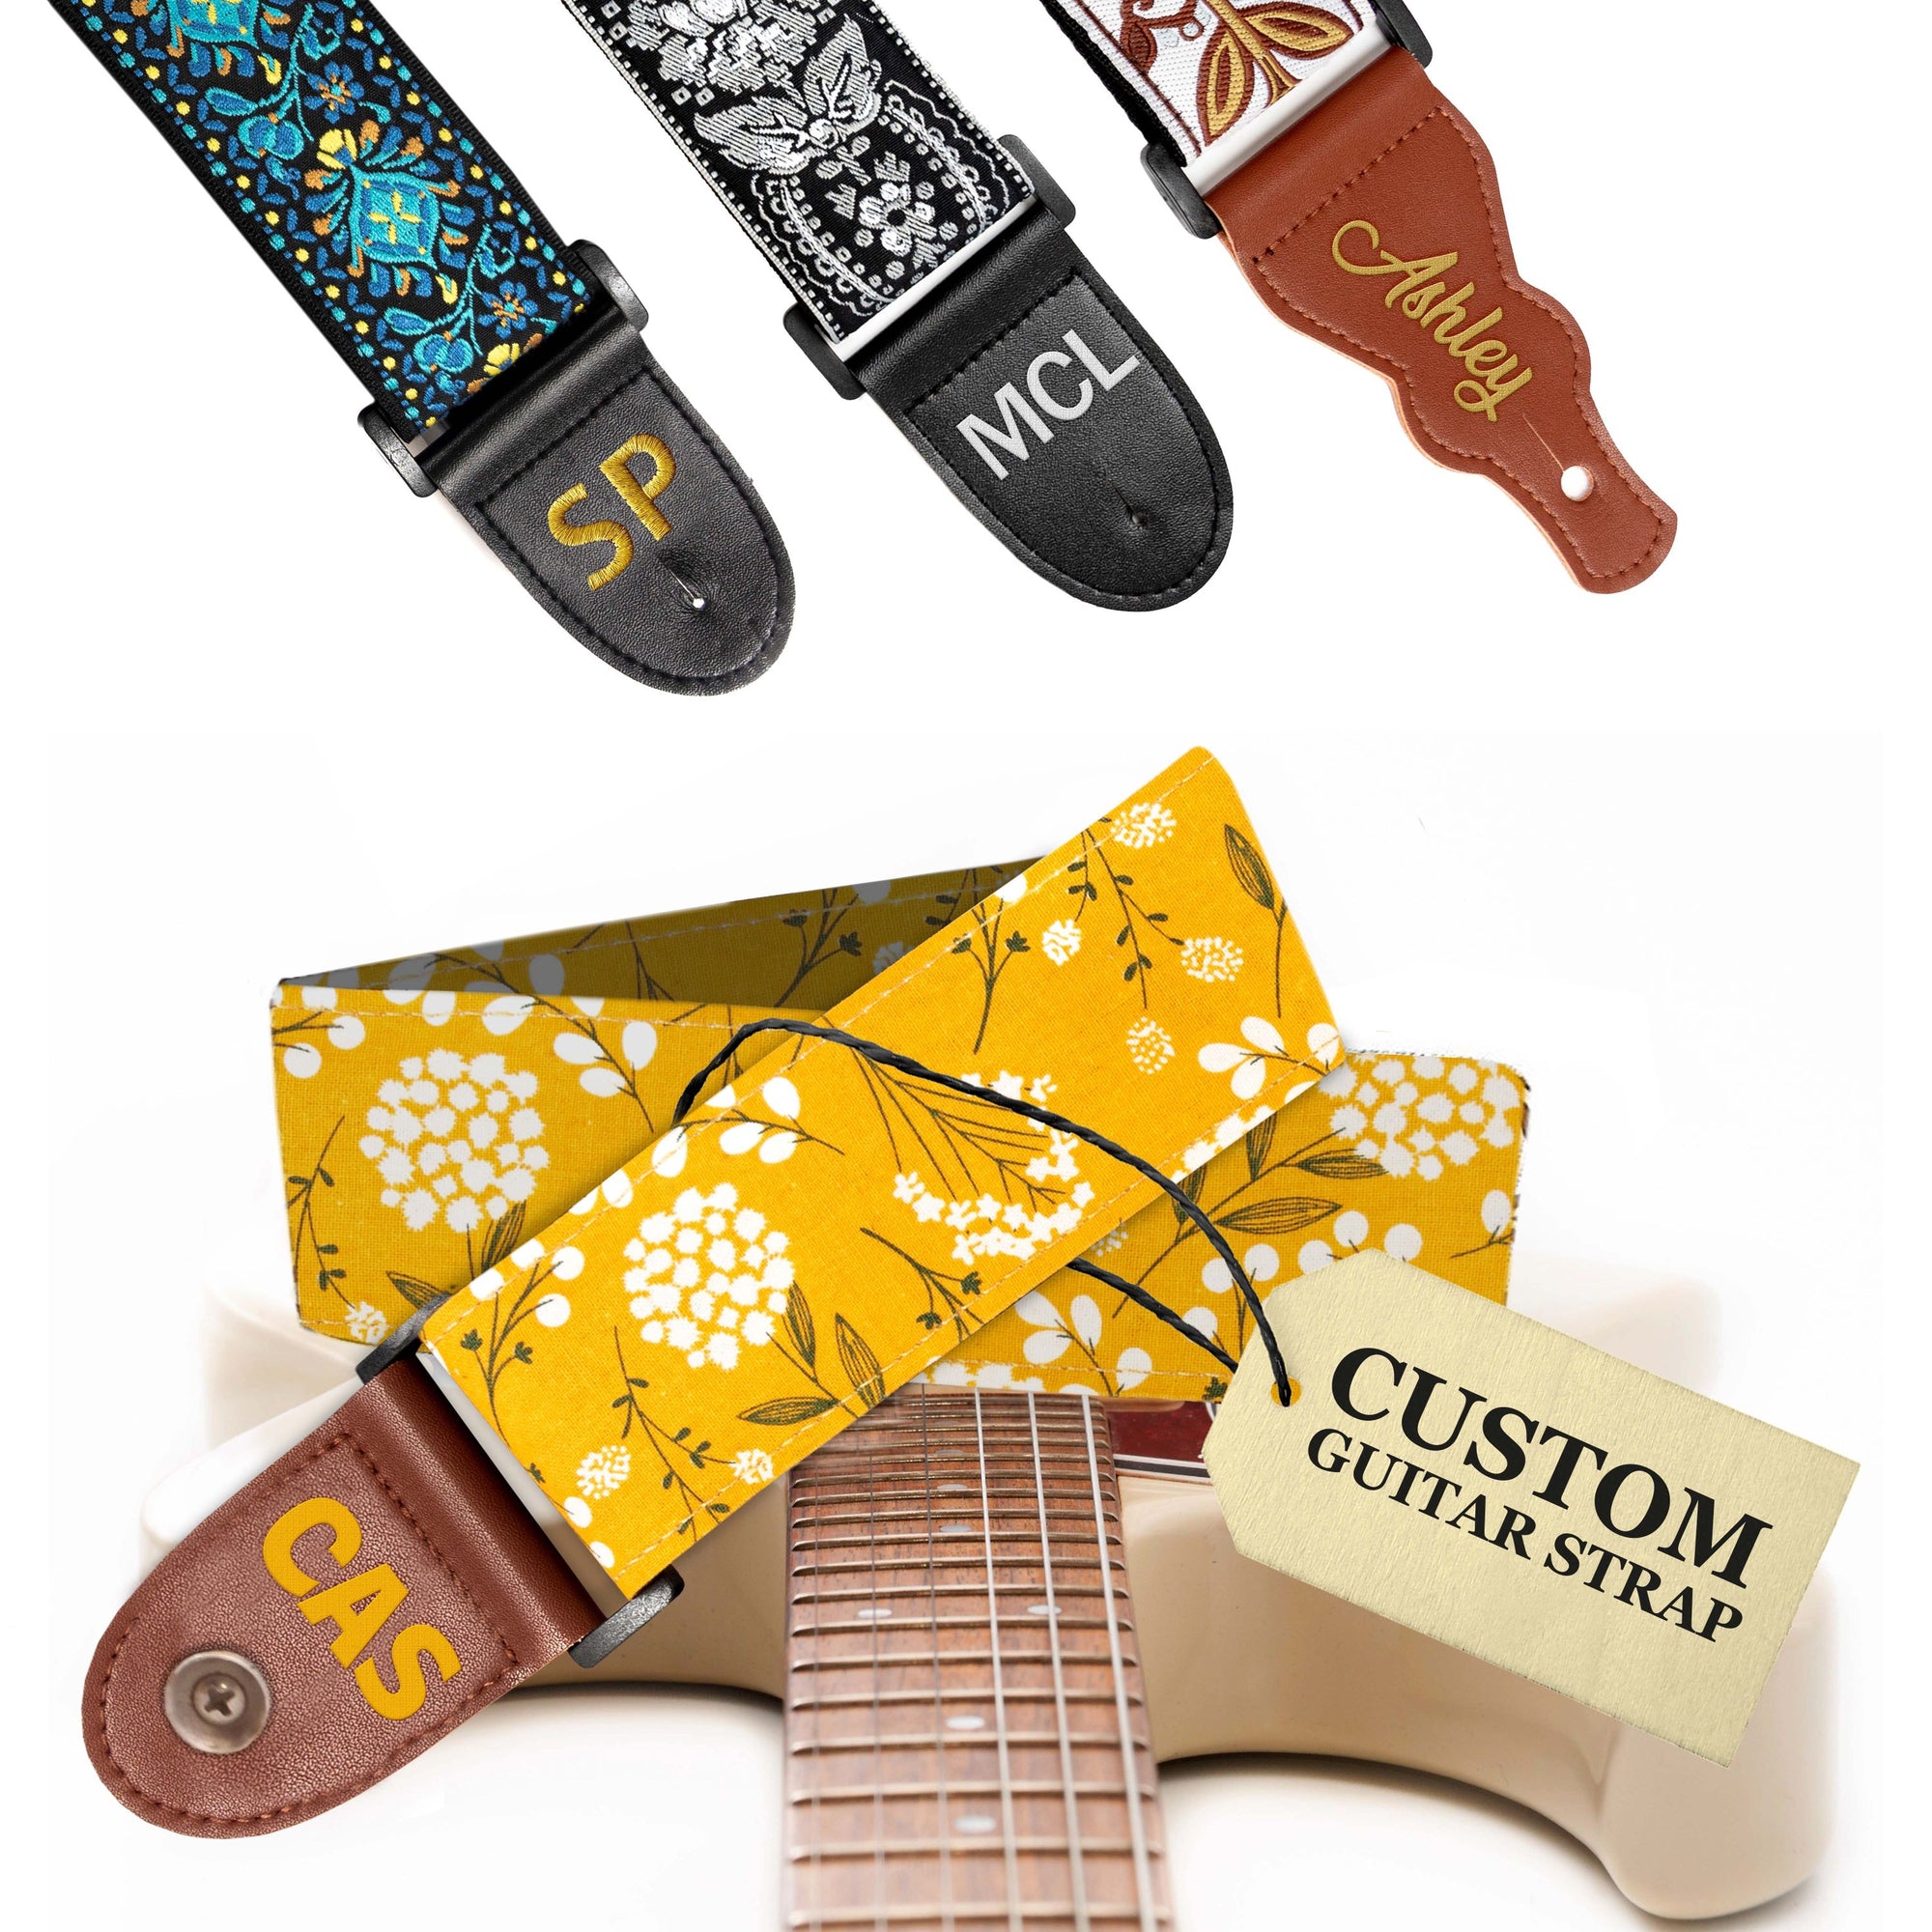 Personalized Guitar Strap- Add your text to make your own unique guitar strap. Best custom gift